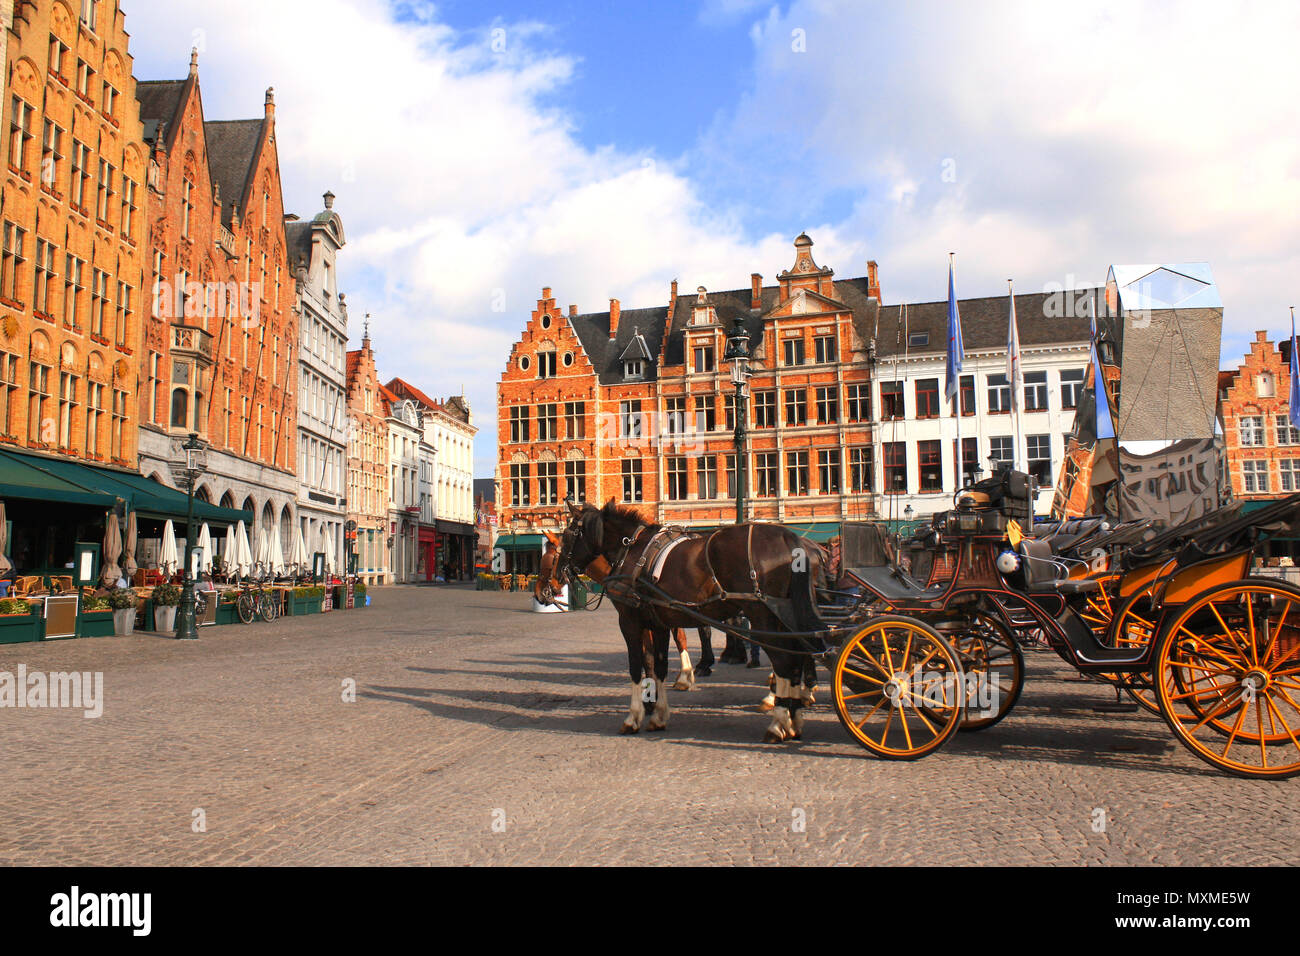 Old houses and horse carriages on Grote Markt square, medieval city Brugge, Belgium, Europe. UNESCO world heritage site Stock Photo